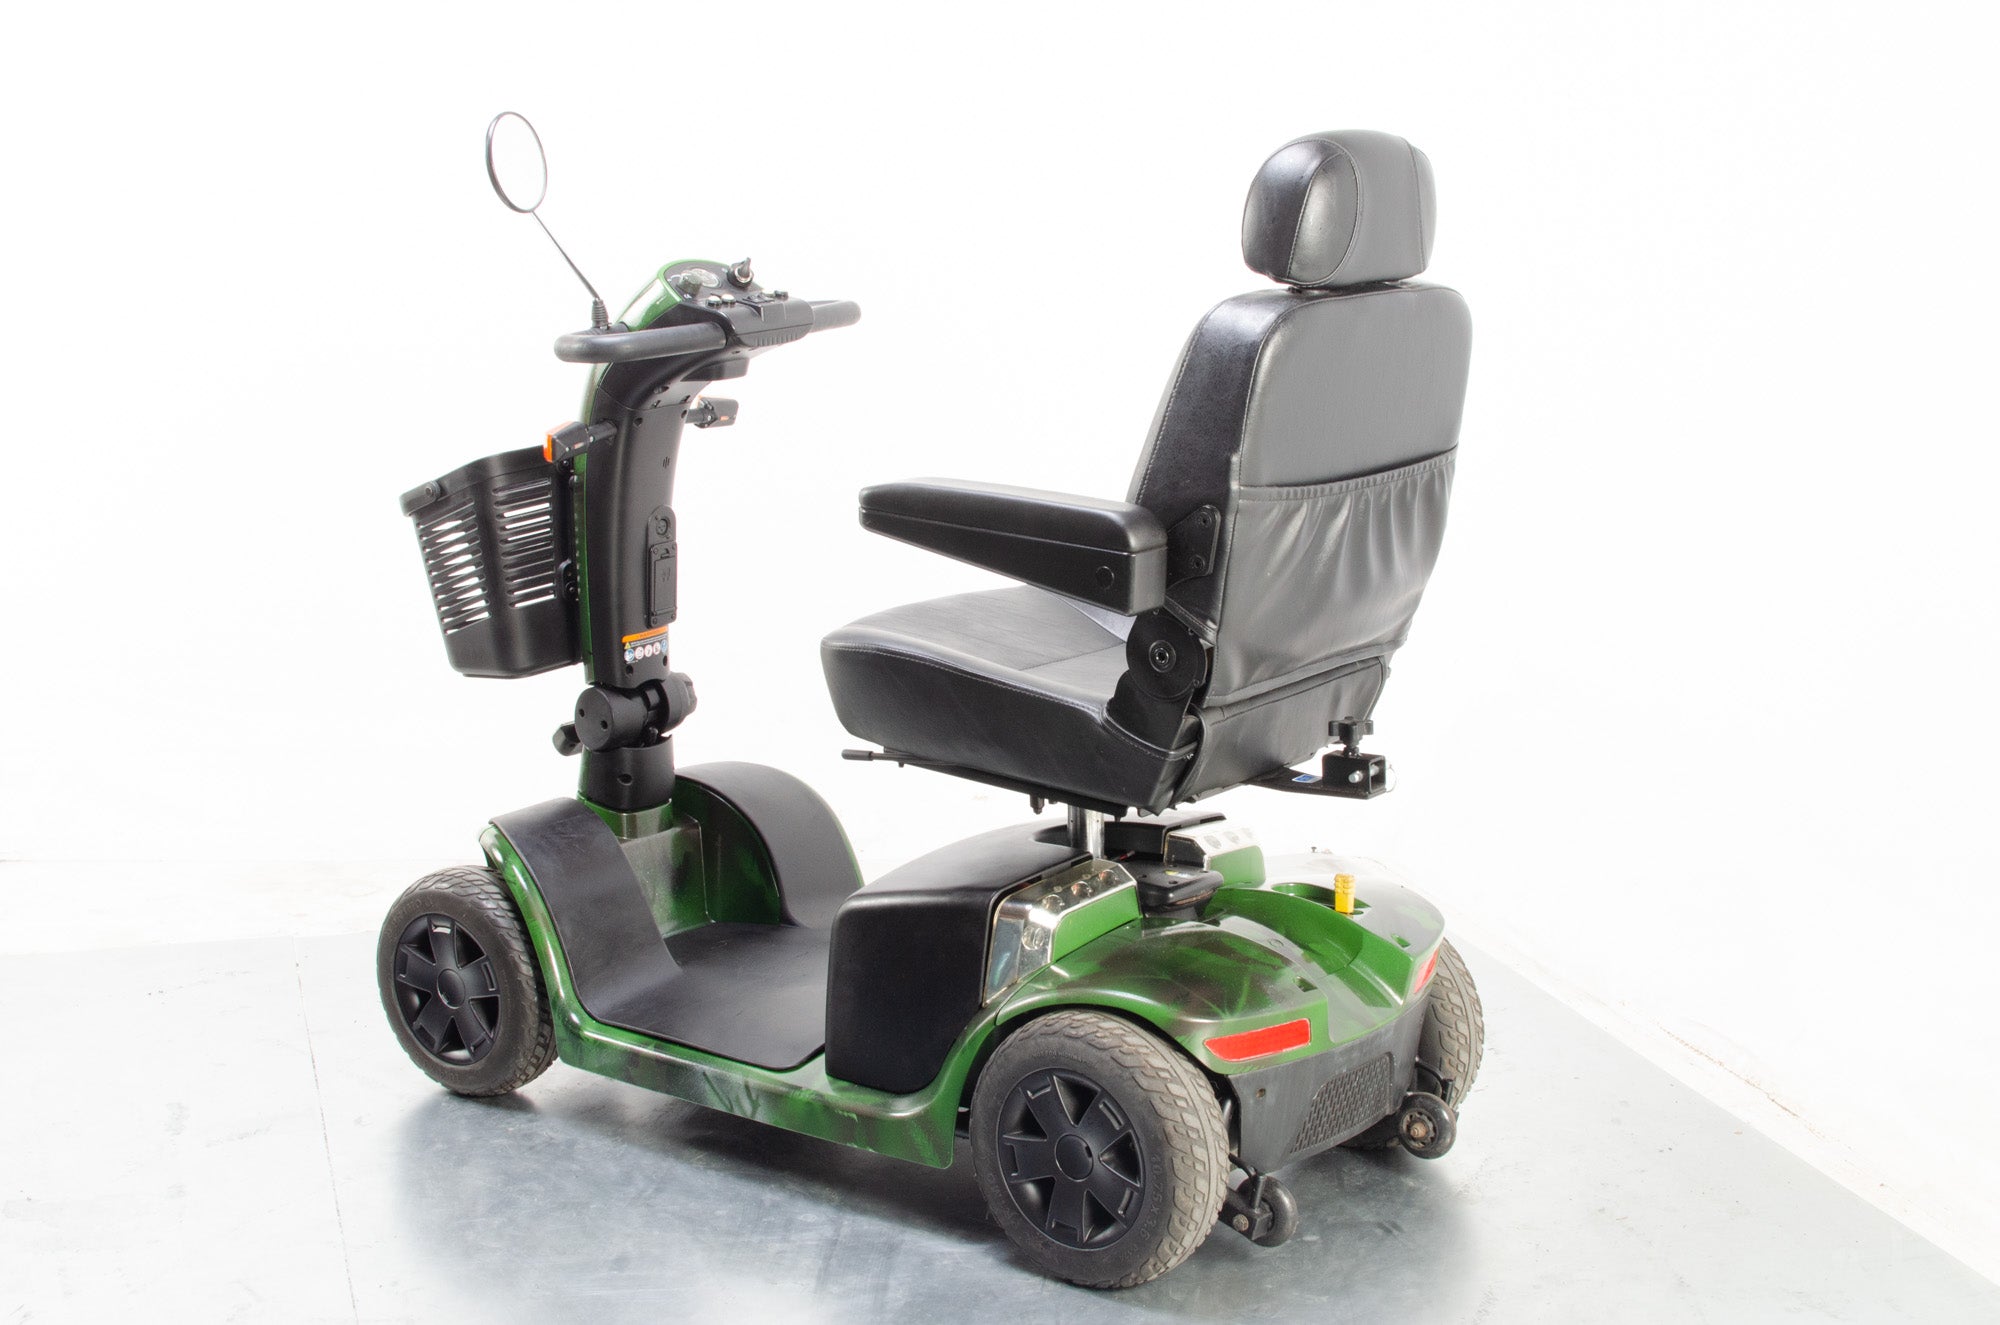 Pride Colt Plus Used Mobility Scooter Midsize Pavement Transportable 25 Stone Folding